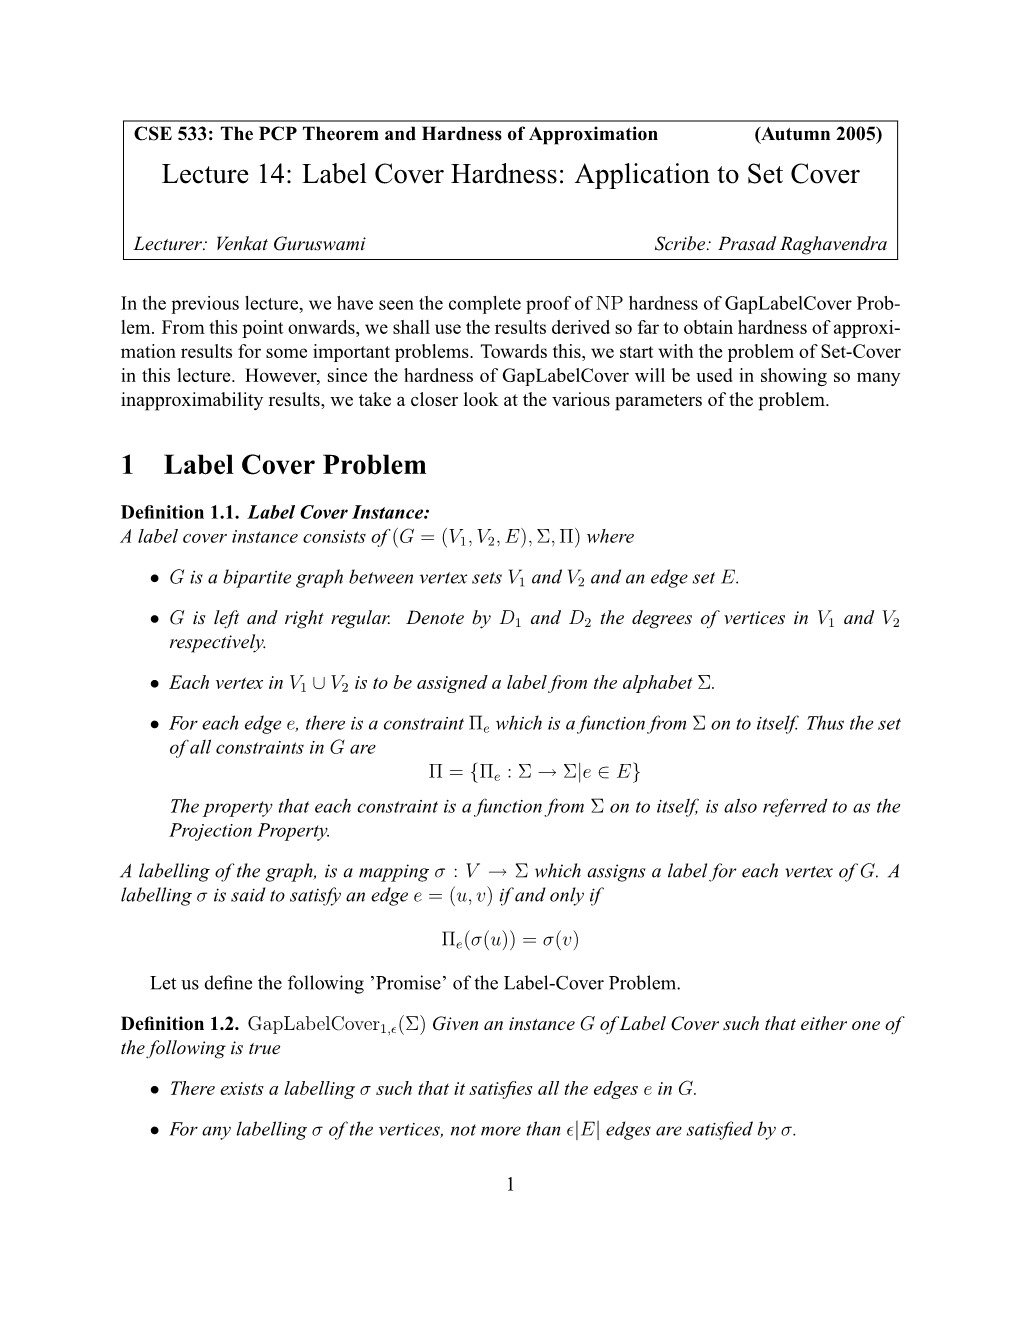 Lecture 14: Label Cover Hardness: Application to Set Cover